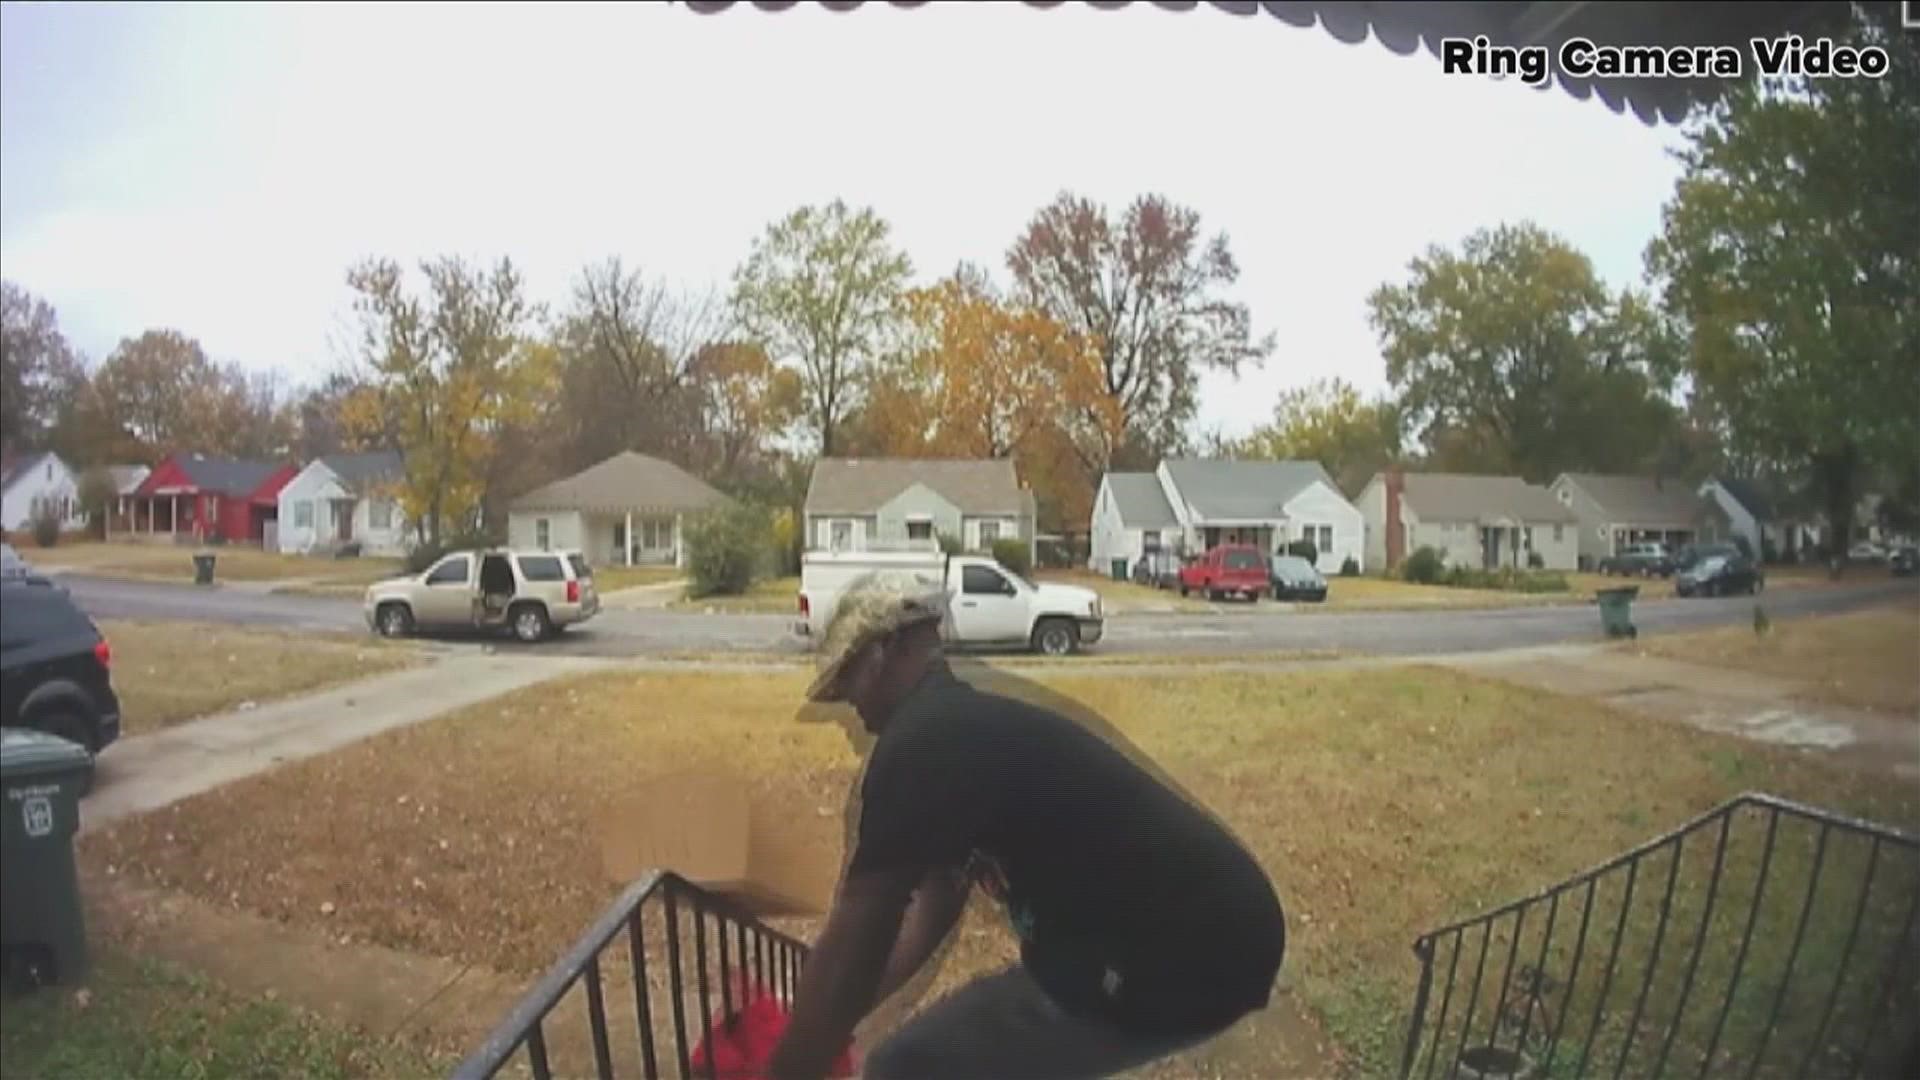 Between Nov. 25 and 27, three instances of packages being stolen were reported by Ring Camera customers in Shelby County.